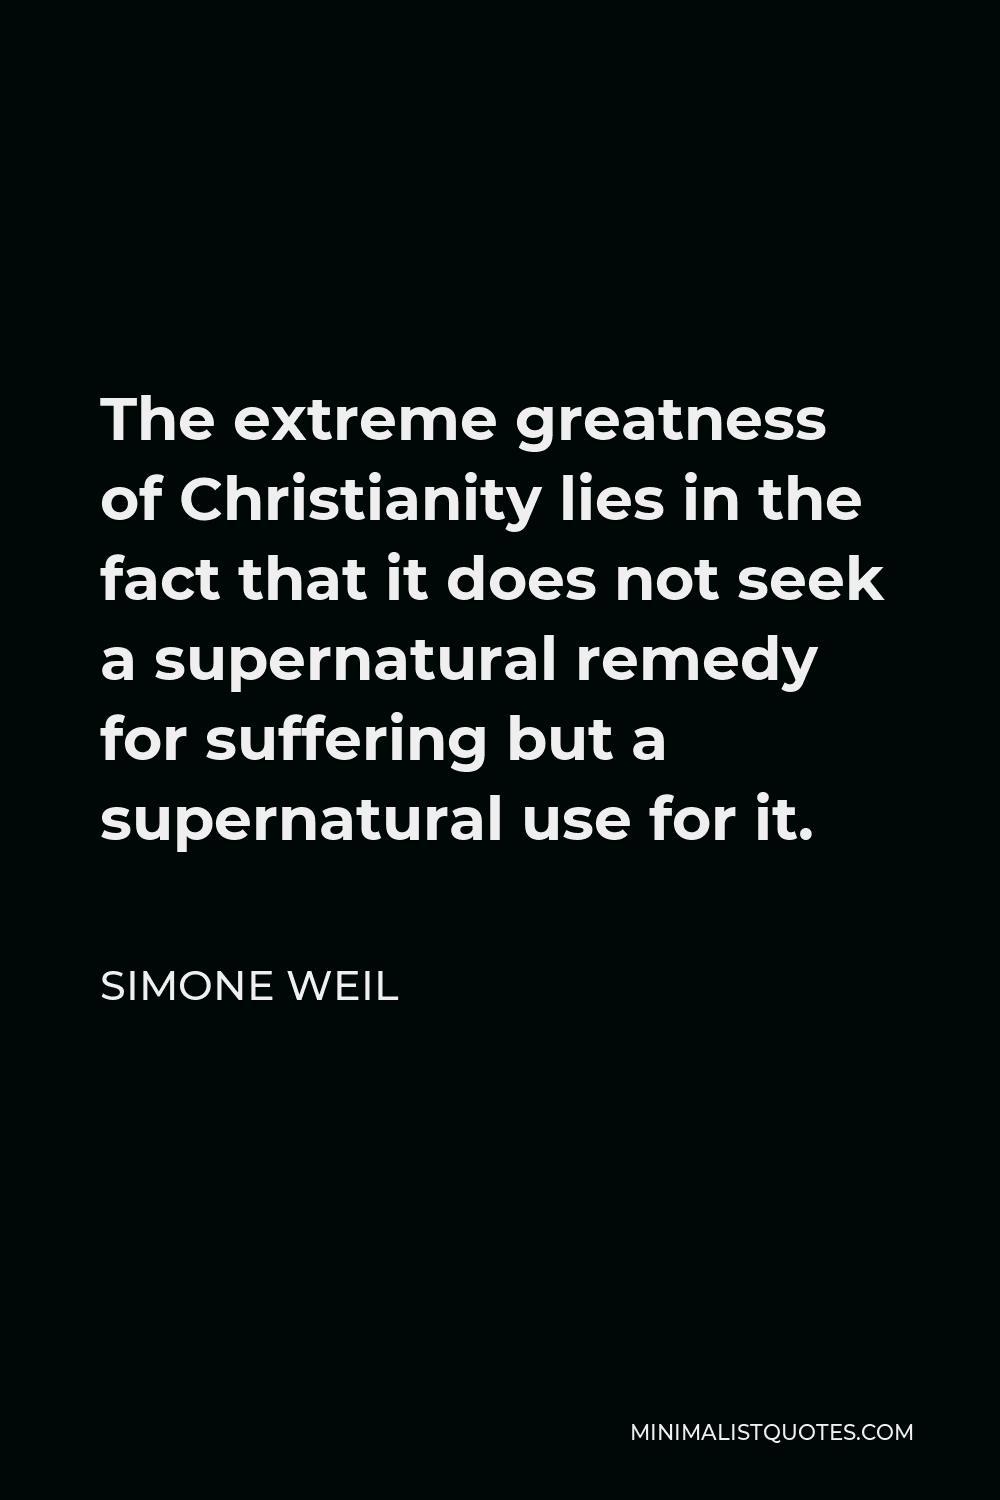 Simone Weil Quote - The extreme greatness of Christianity lies in the fact that it does not seek a supernatural remedy for suffering but a supernatural use for it.